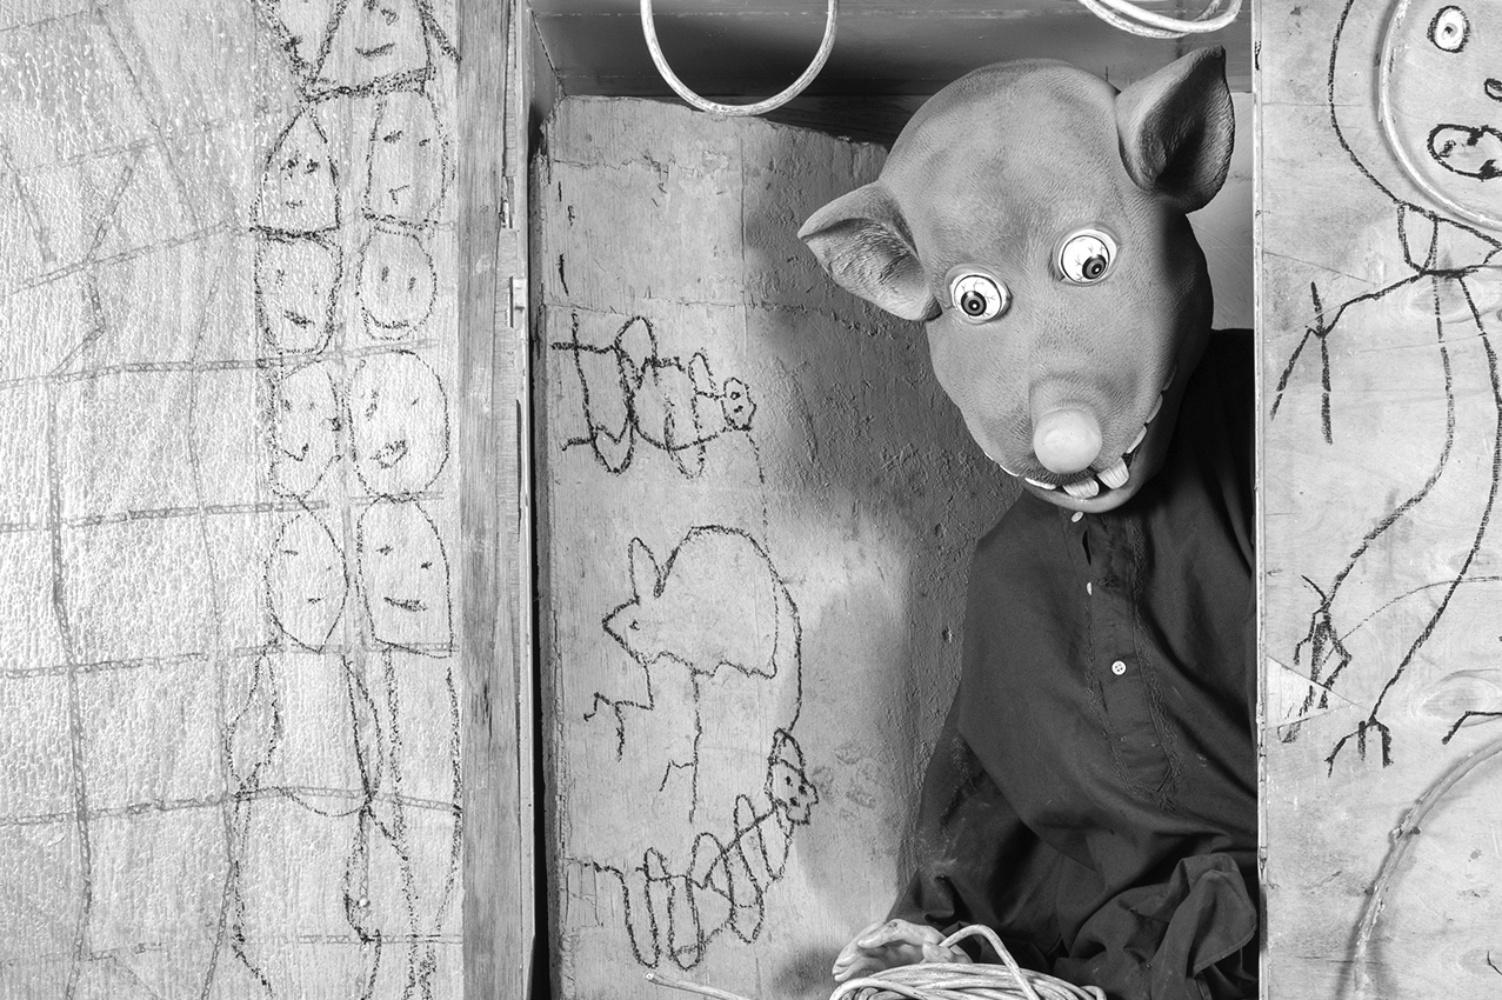 Roger BALLEN (*1950, America/South Africa)
Bound, 2018
Archival pigment print
61 x 43 cm (24 x 16 7/8 in.)
Edition of 9, plus 2 AP; Ed. no. 3/9
Print only

– Roger the Rat

Surreal, refined, disturbing: Roger Ballen has made a name for himself with